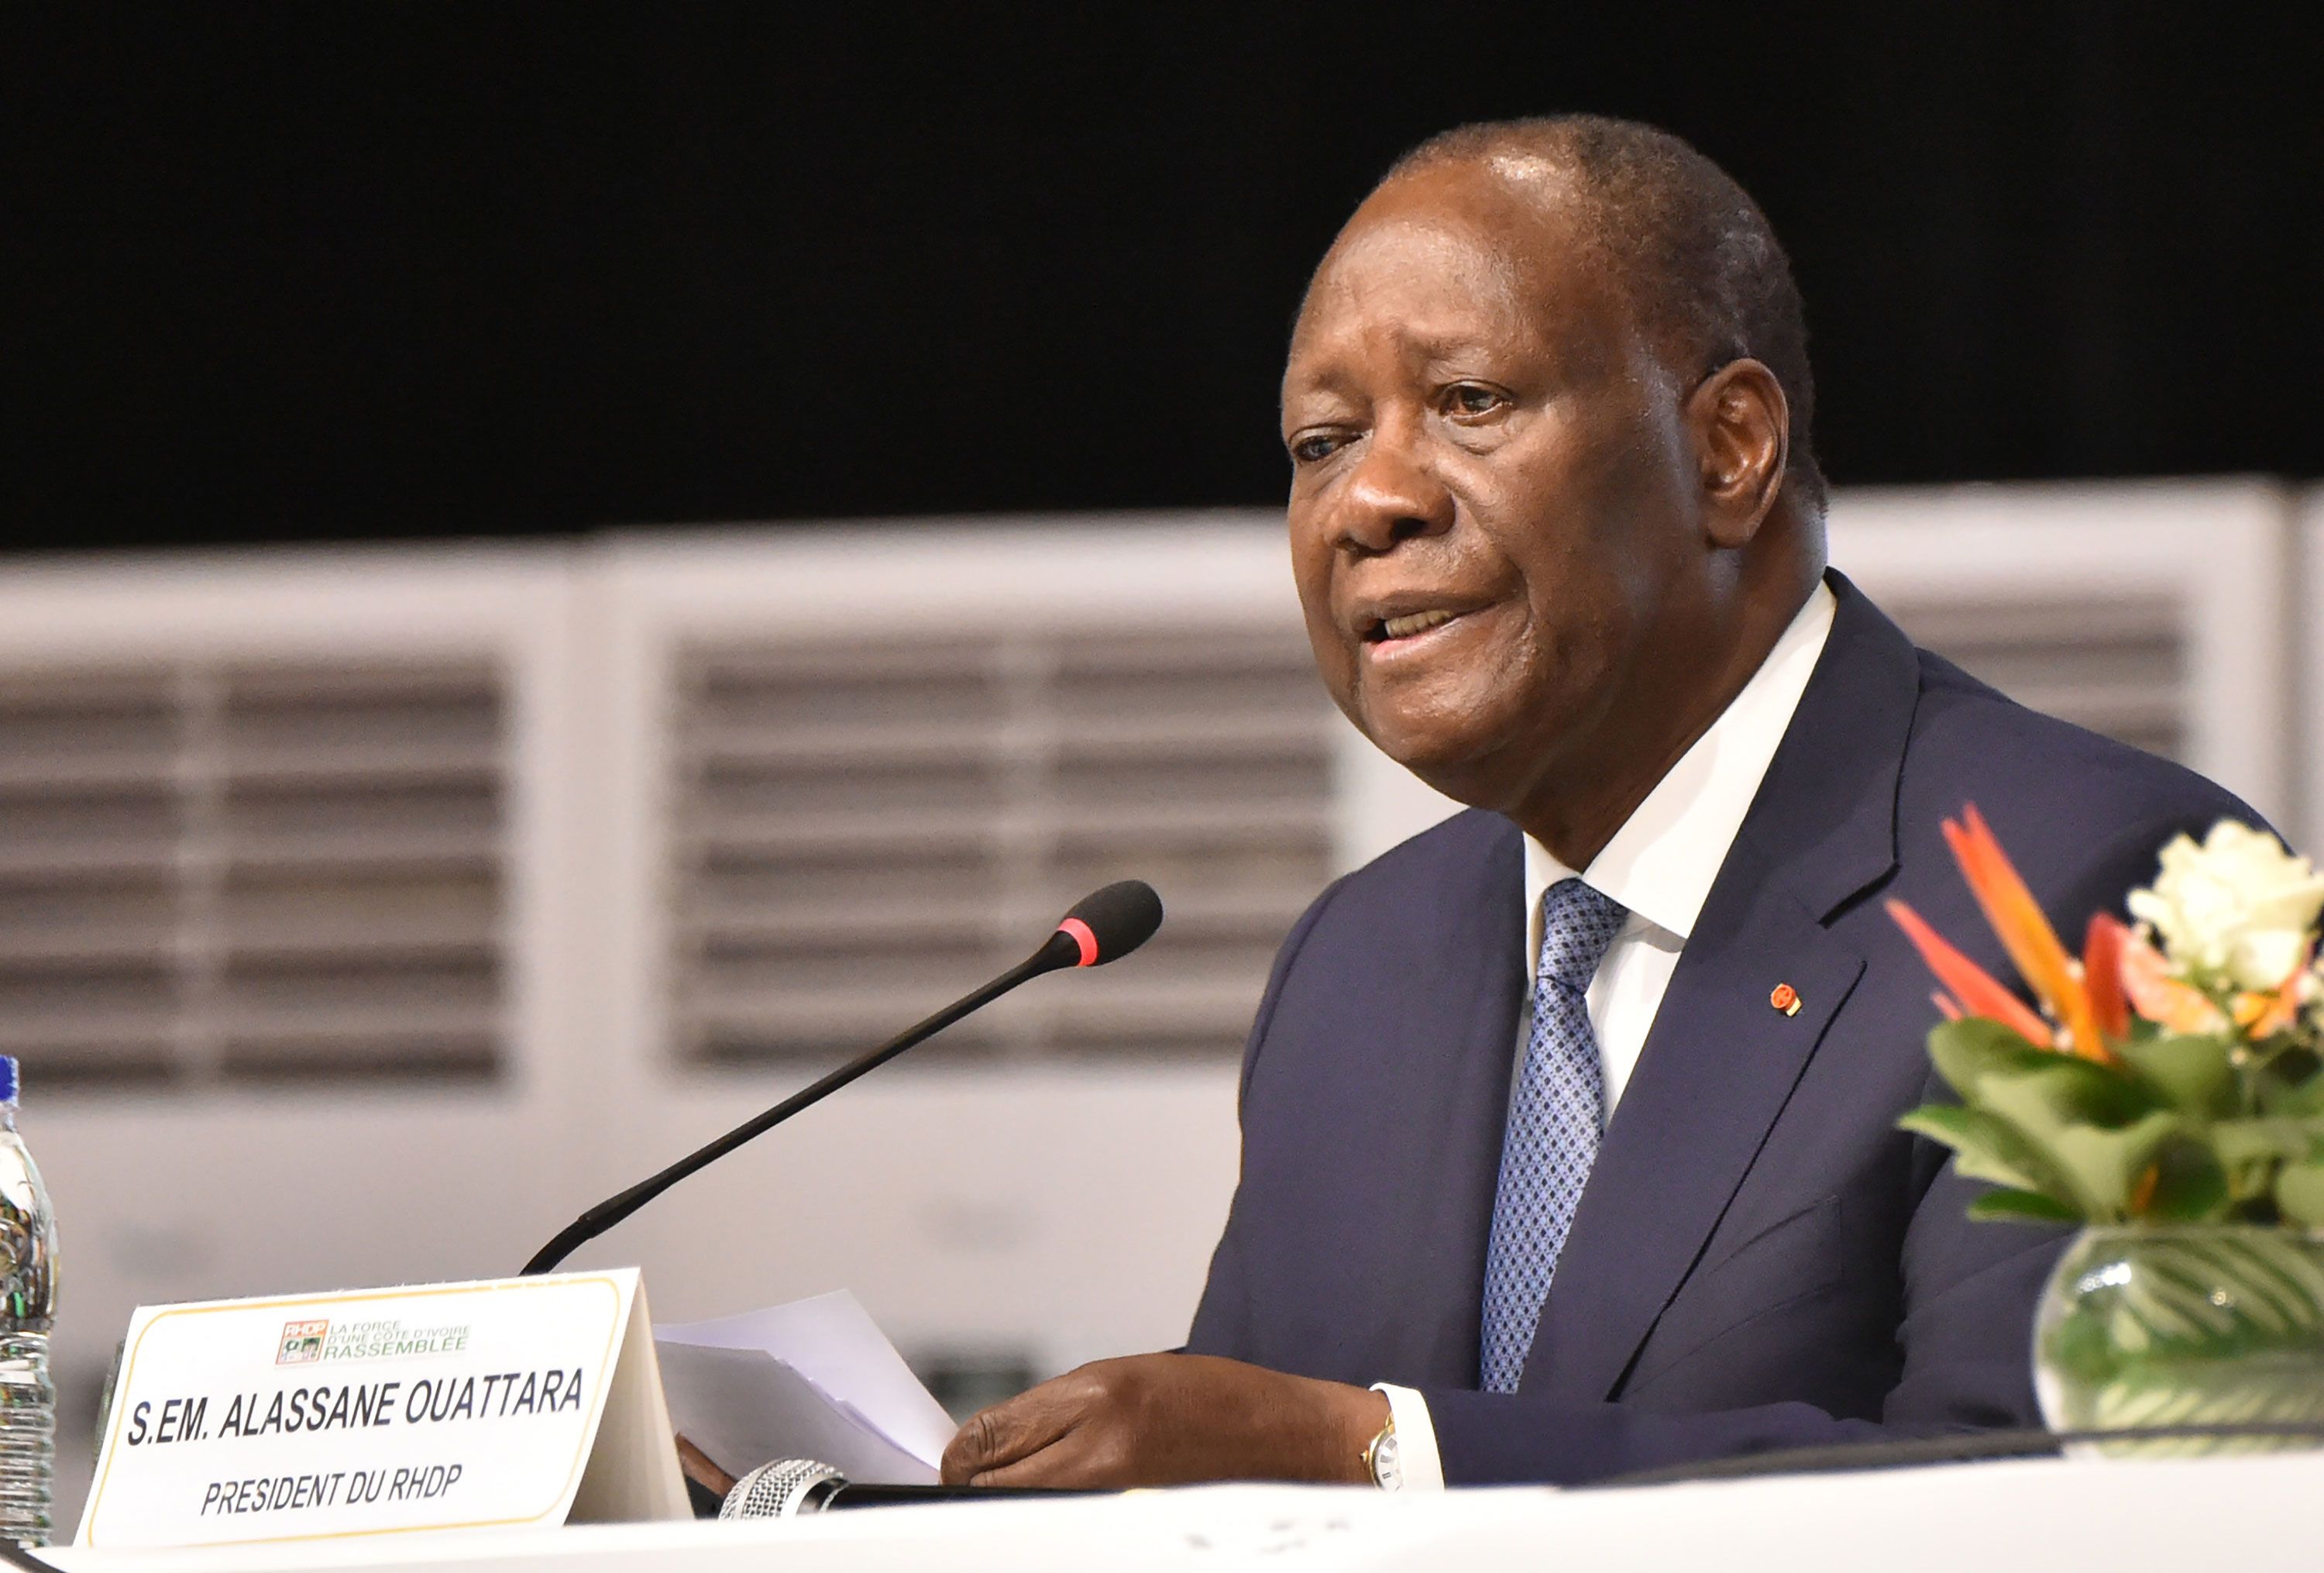 Pump arsenal ironi Ivory Coast: His rivals have been arrested or exiled, but President  Alassane Ouattara insists 'They're not Democrats' | CNN